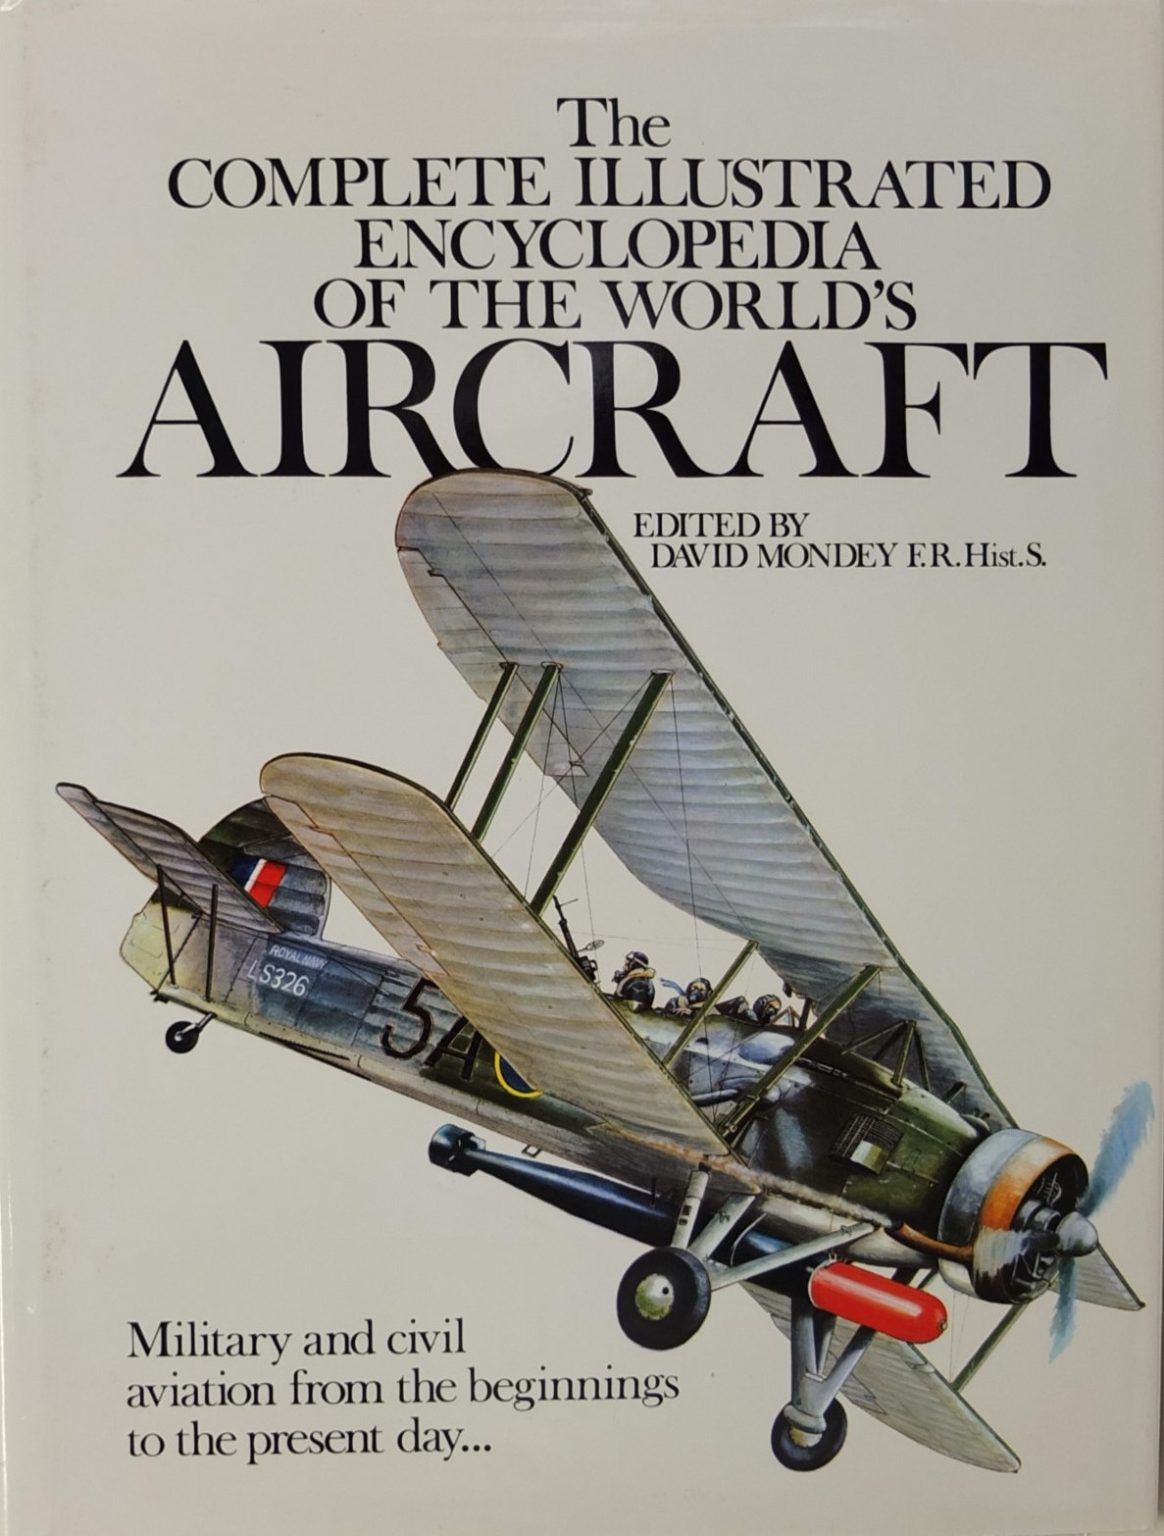 THE COMPLETE ILLUSTRATED ENCYCLOPEDIA: Of the World's Aircraft